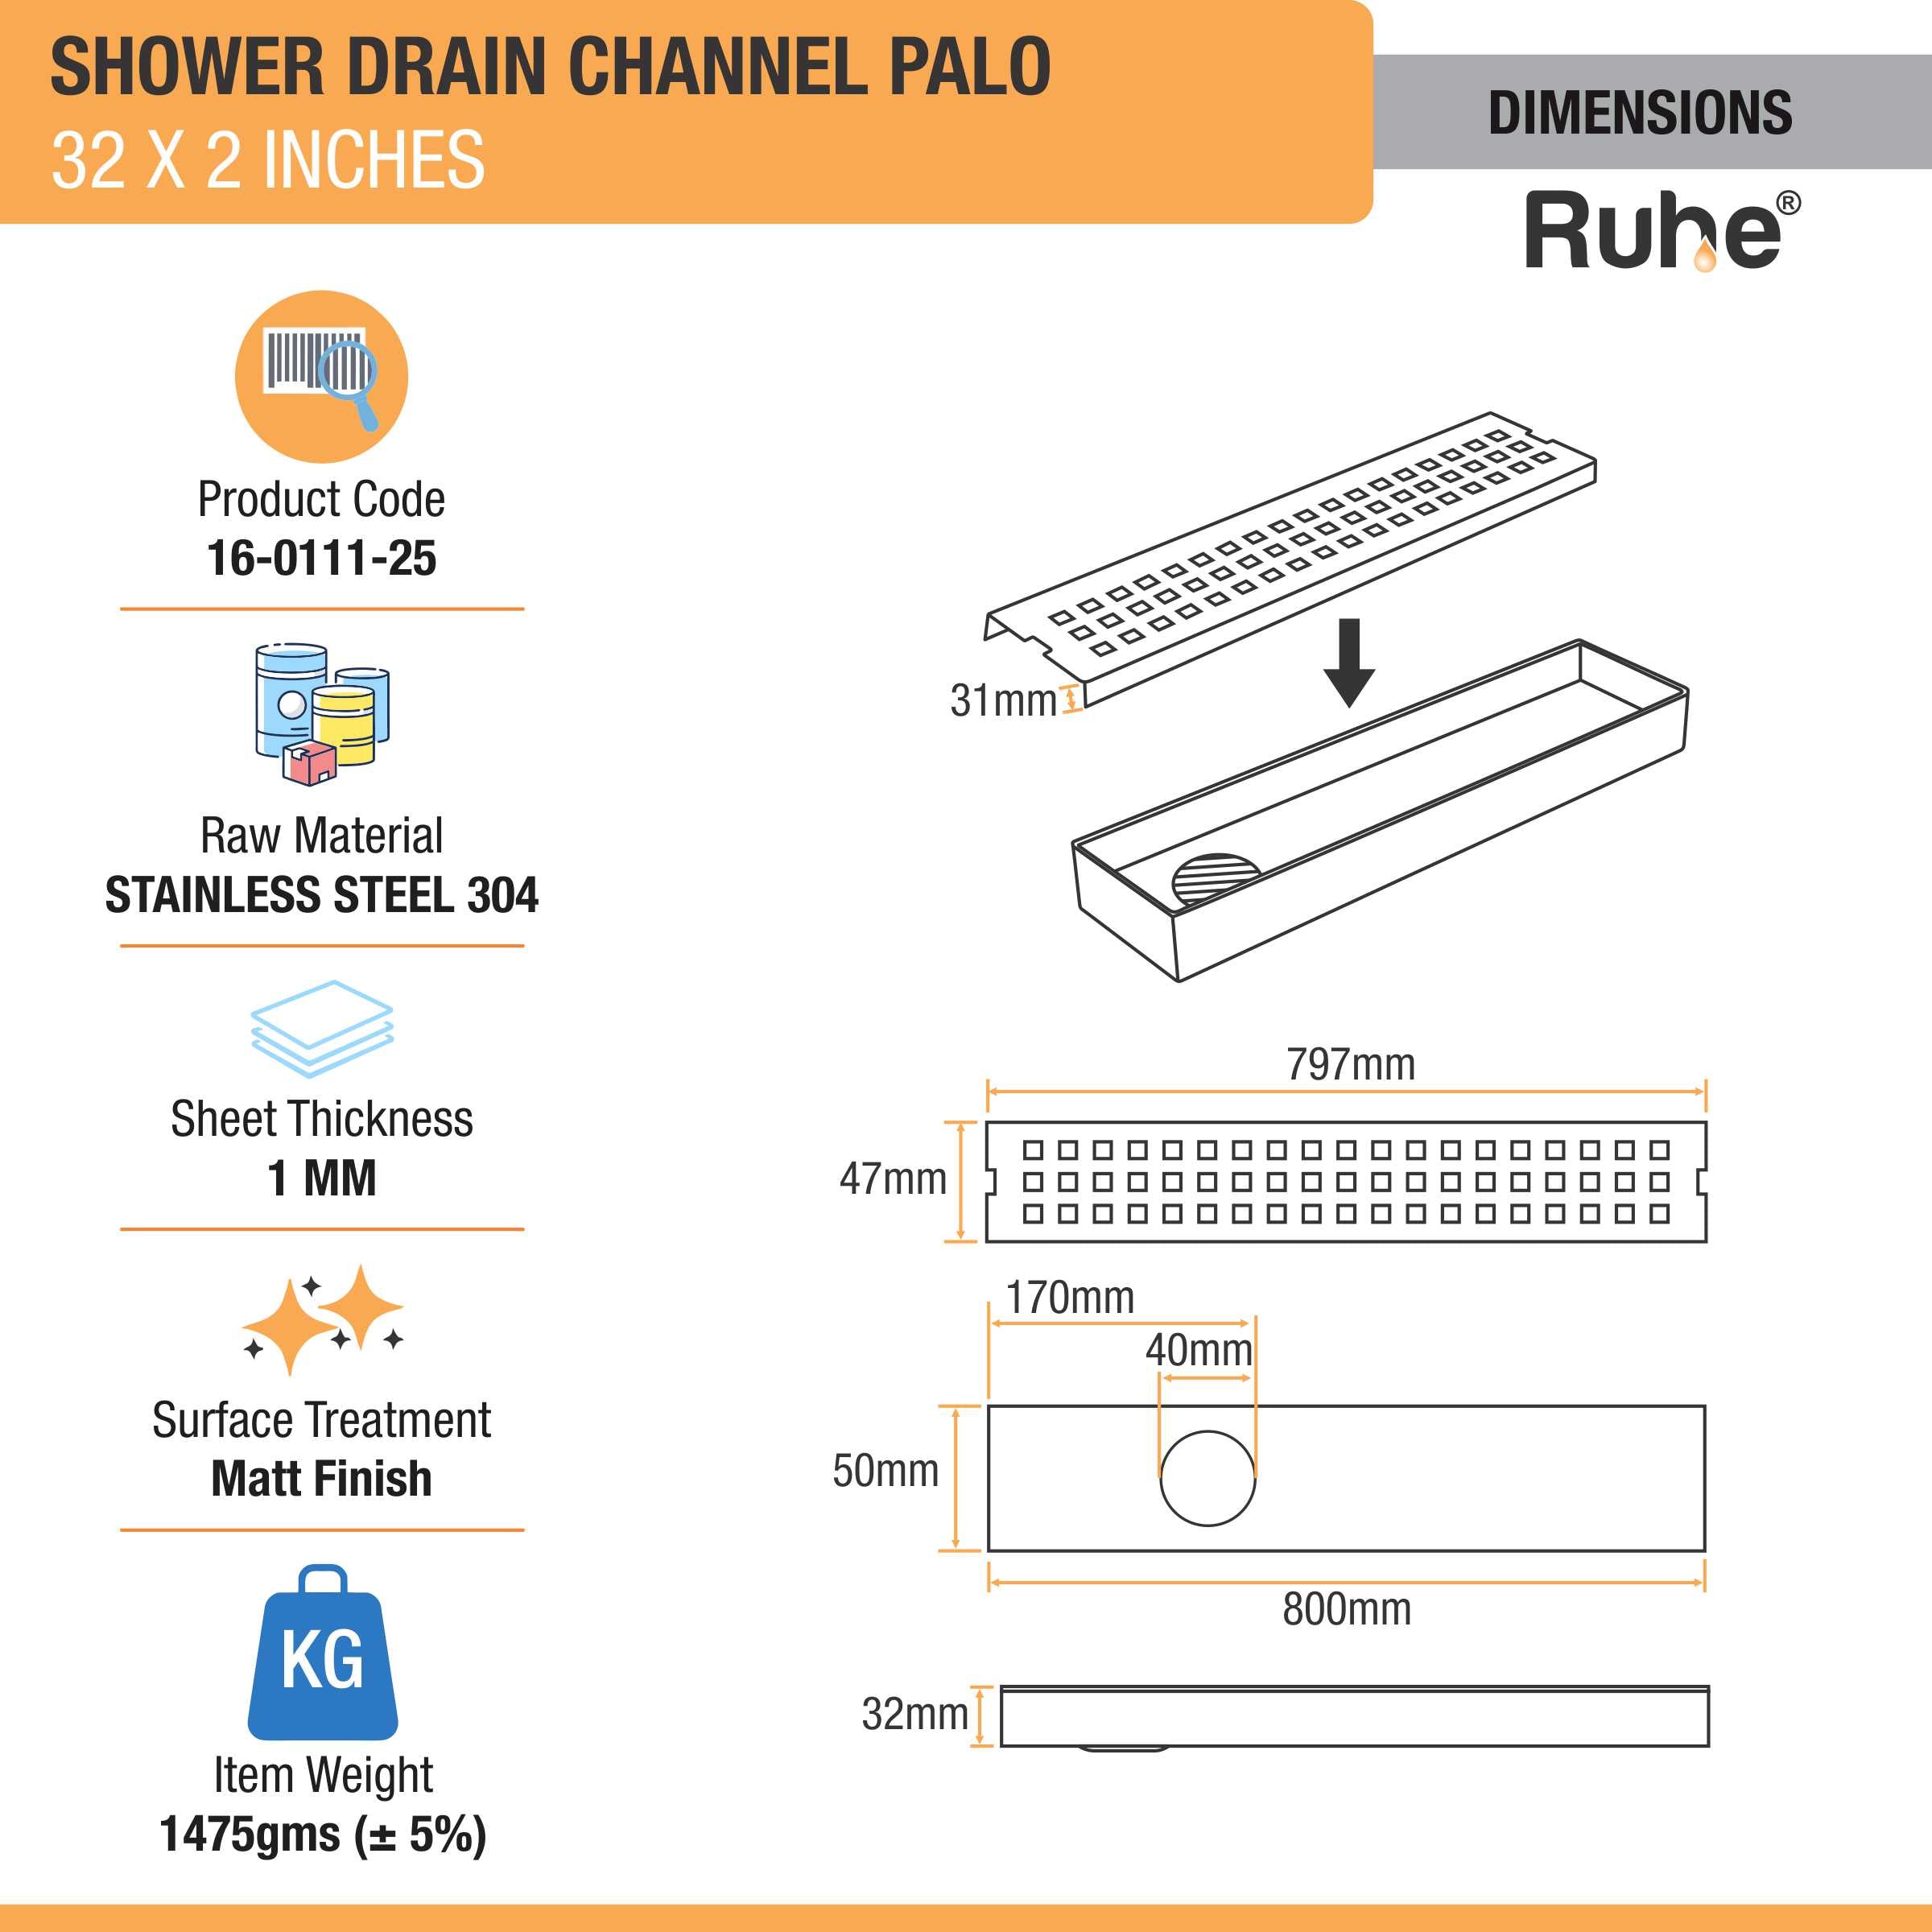 Palo Shower Drain Channel (32 X 2 Inches) (304 Grade) dimensions and size